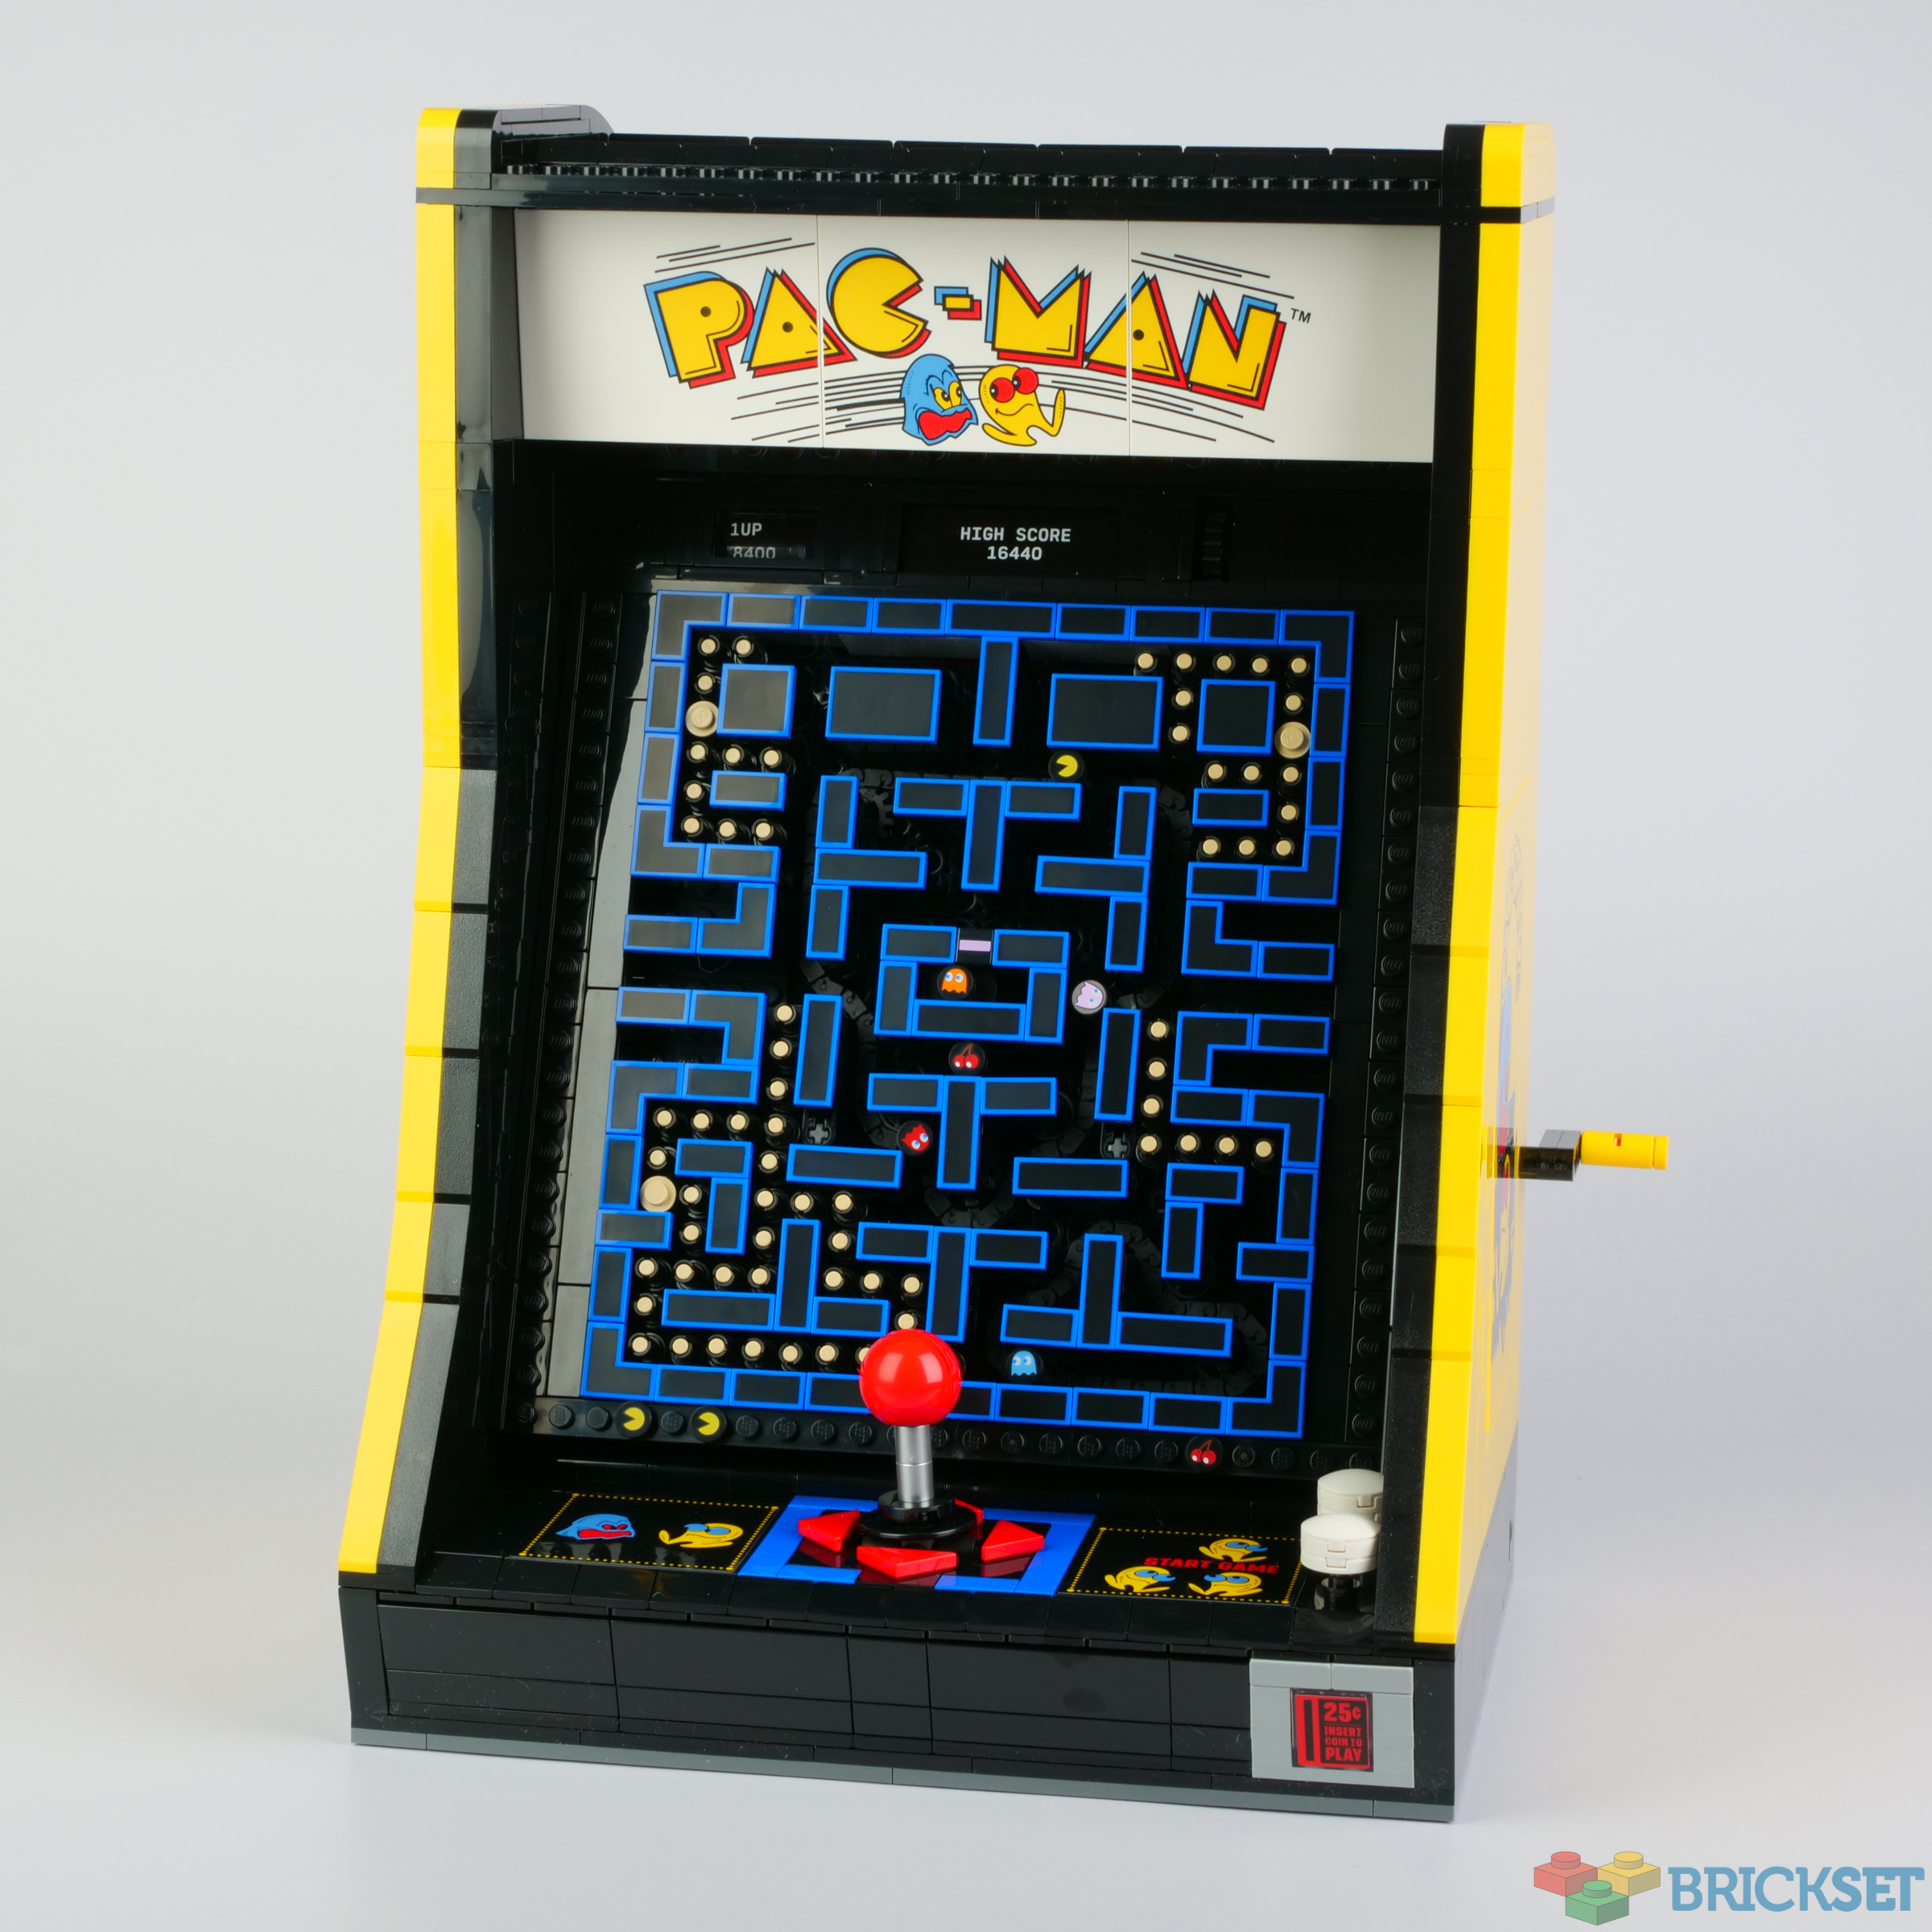 Lego Pac-Man set is real, costs £230